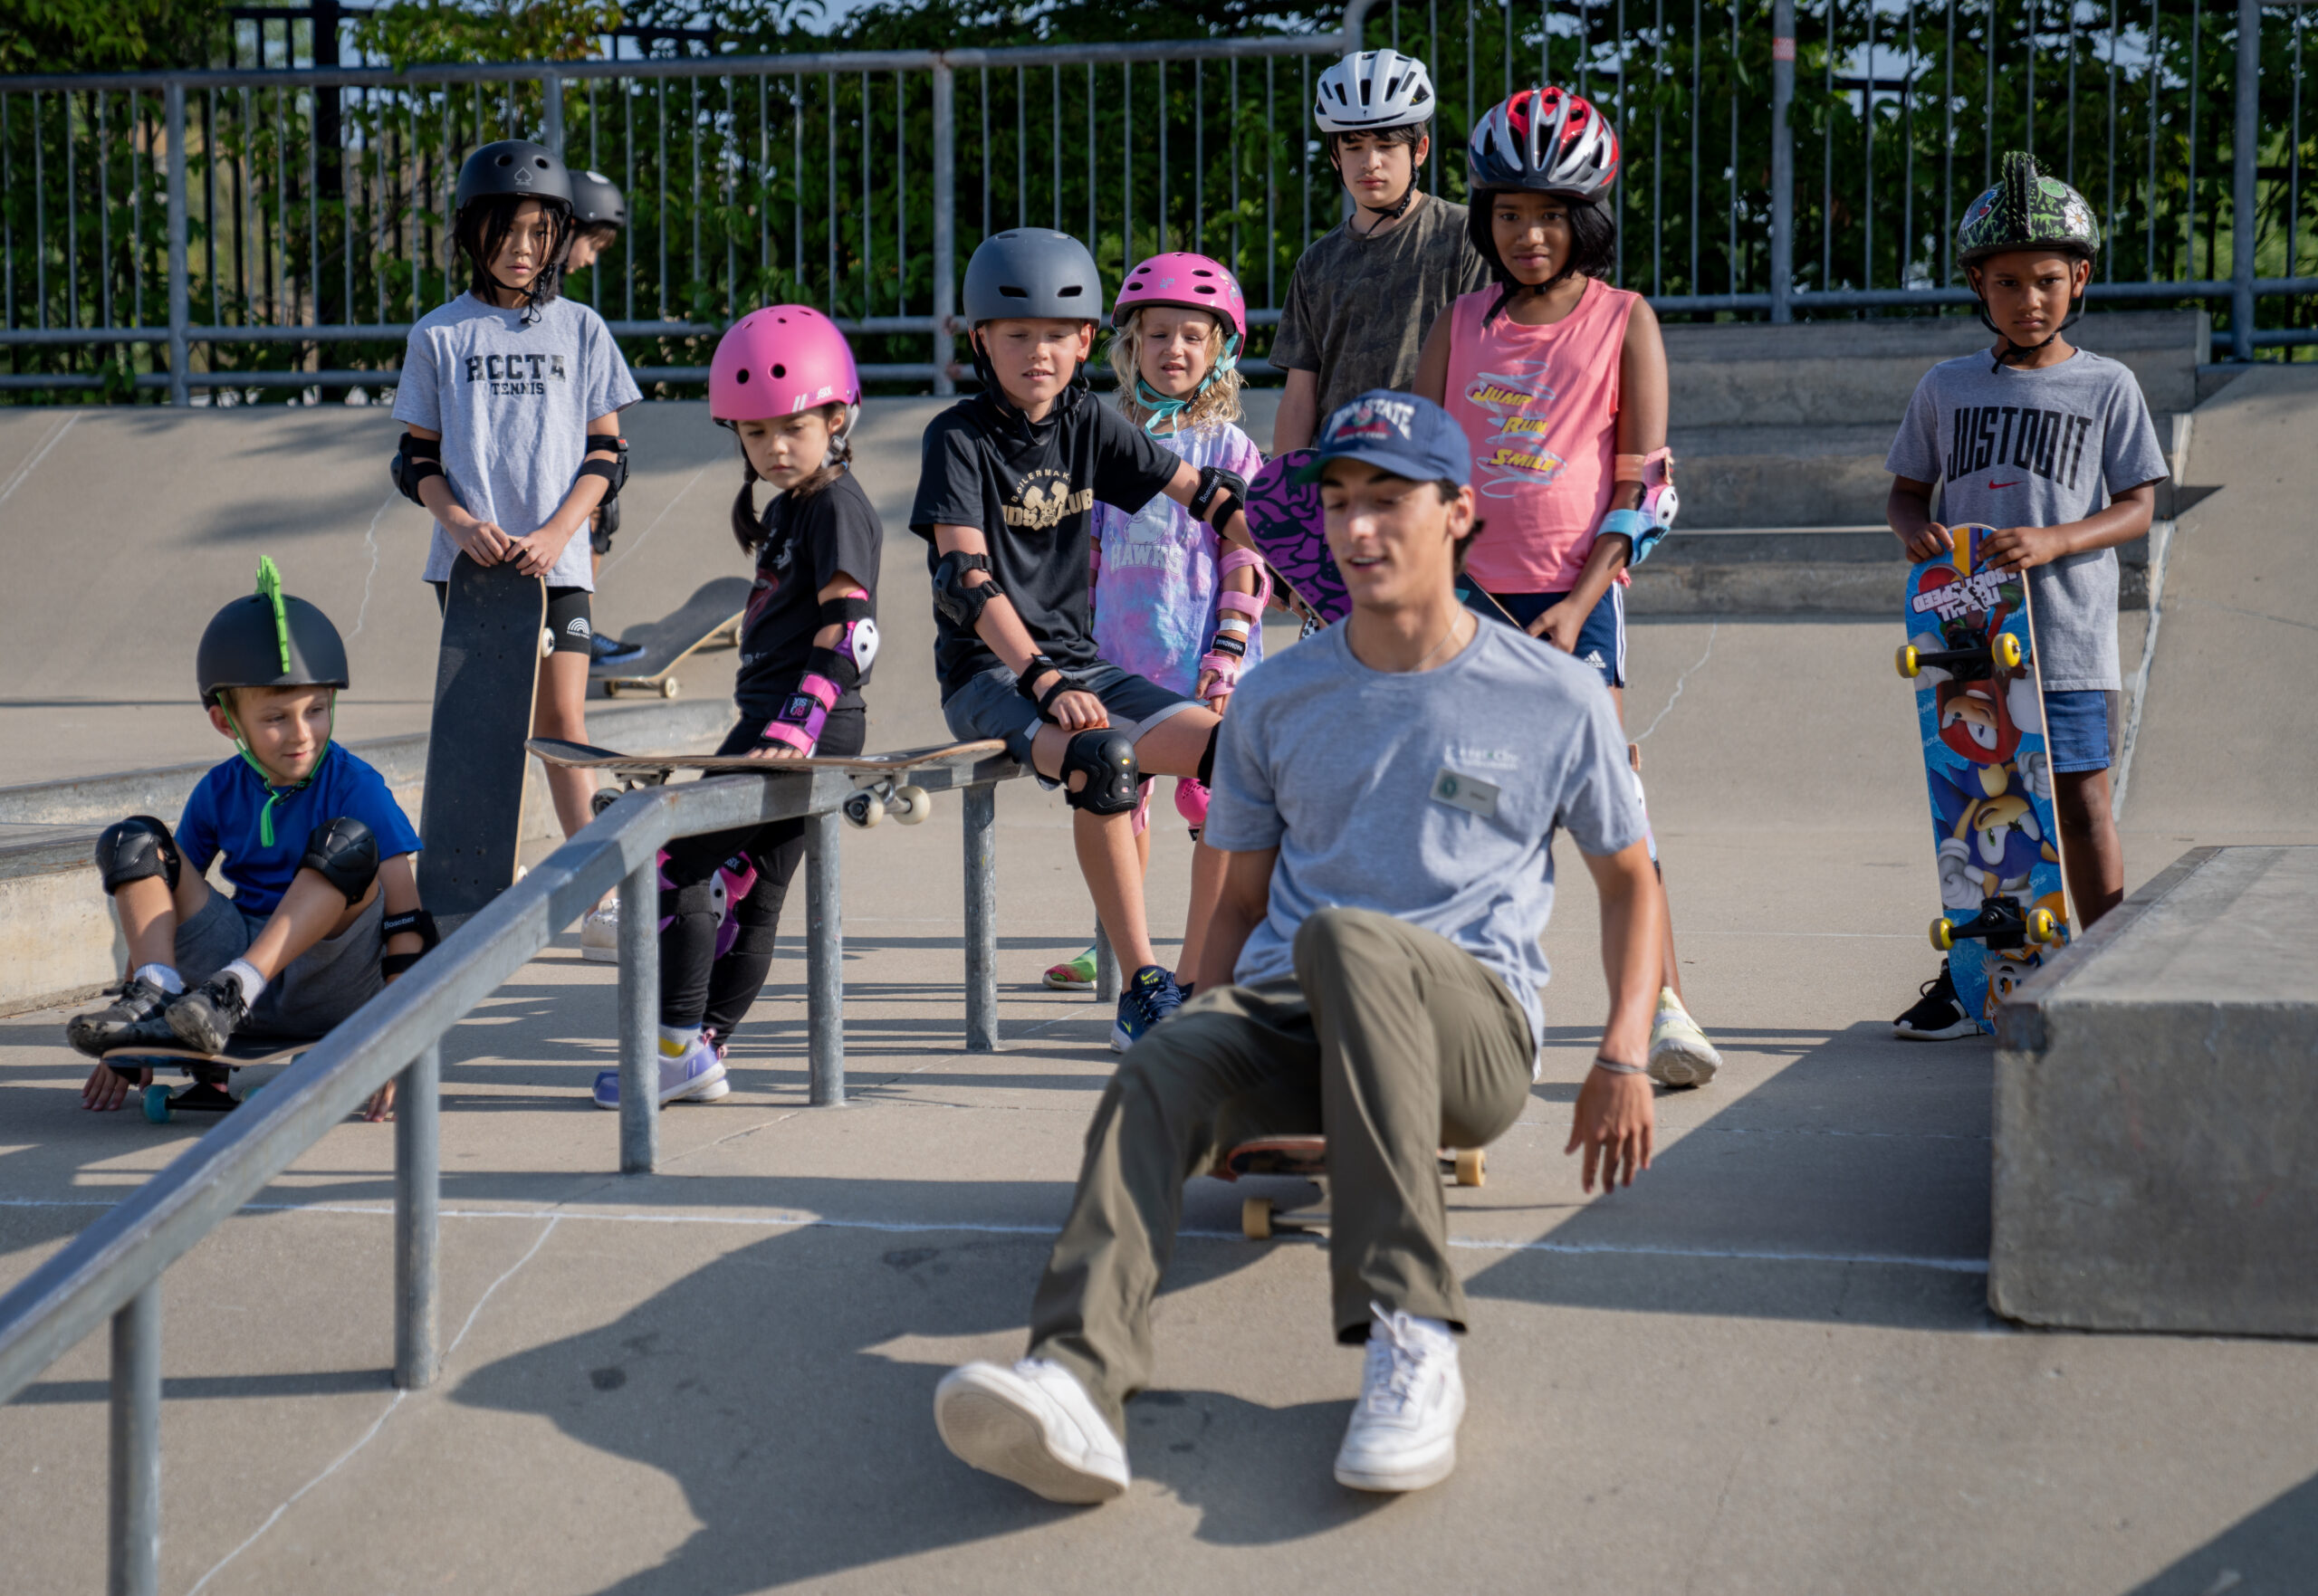 Skateboarding instructor shows kids how to get used to the feeling of the skateboard going downhill by sitting on the board and going down the side of the ramp on your bottom at the Skatepark.